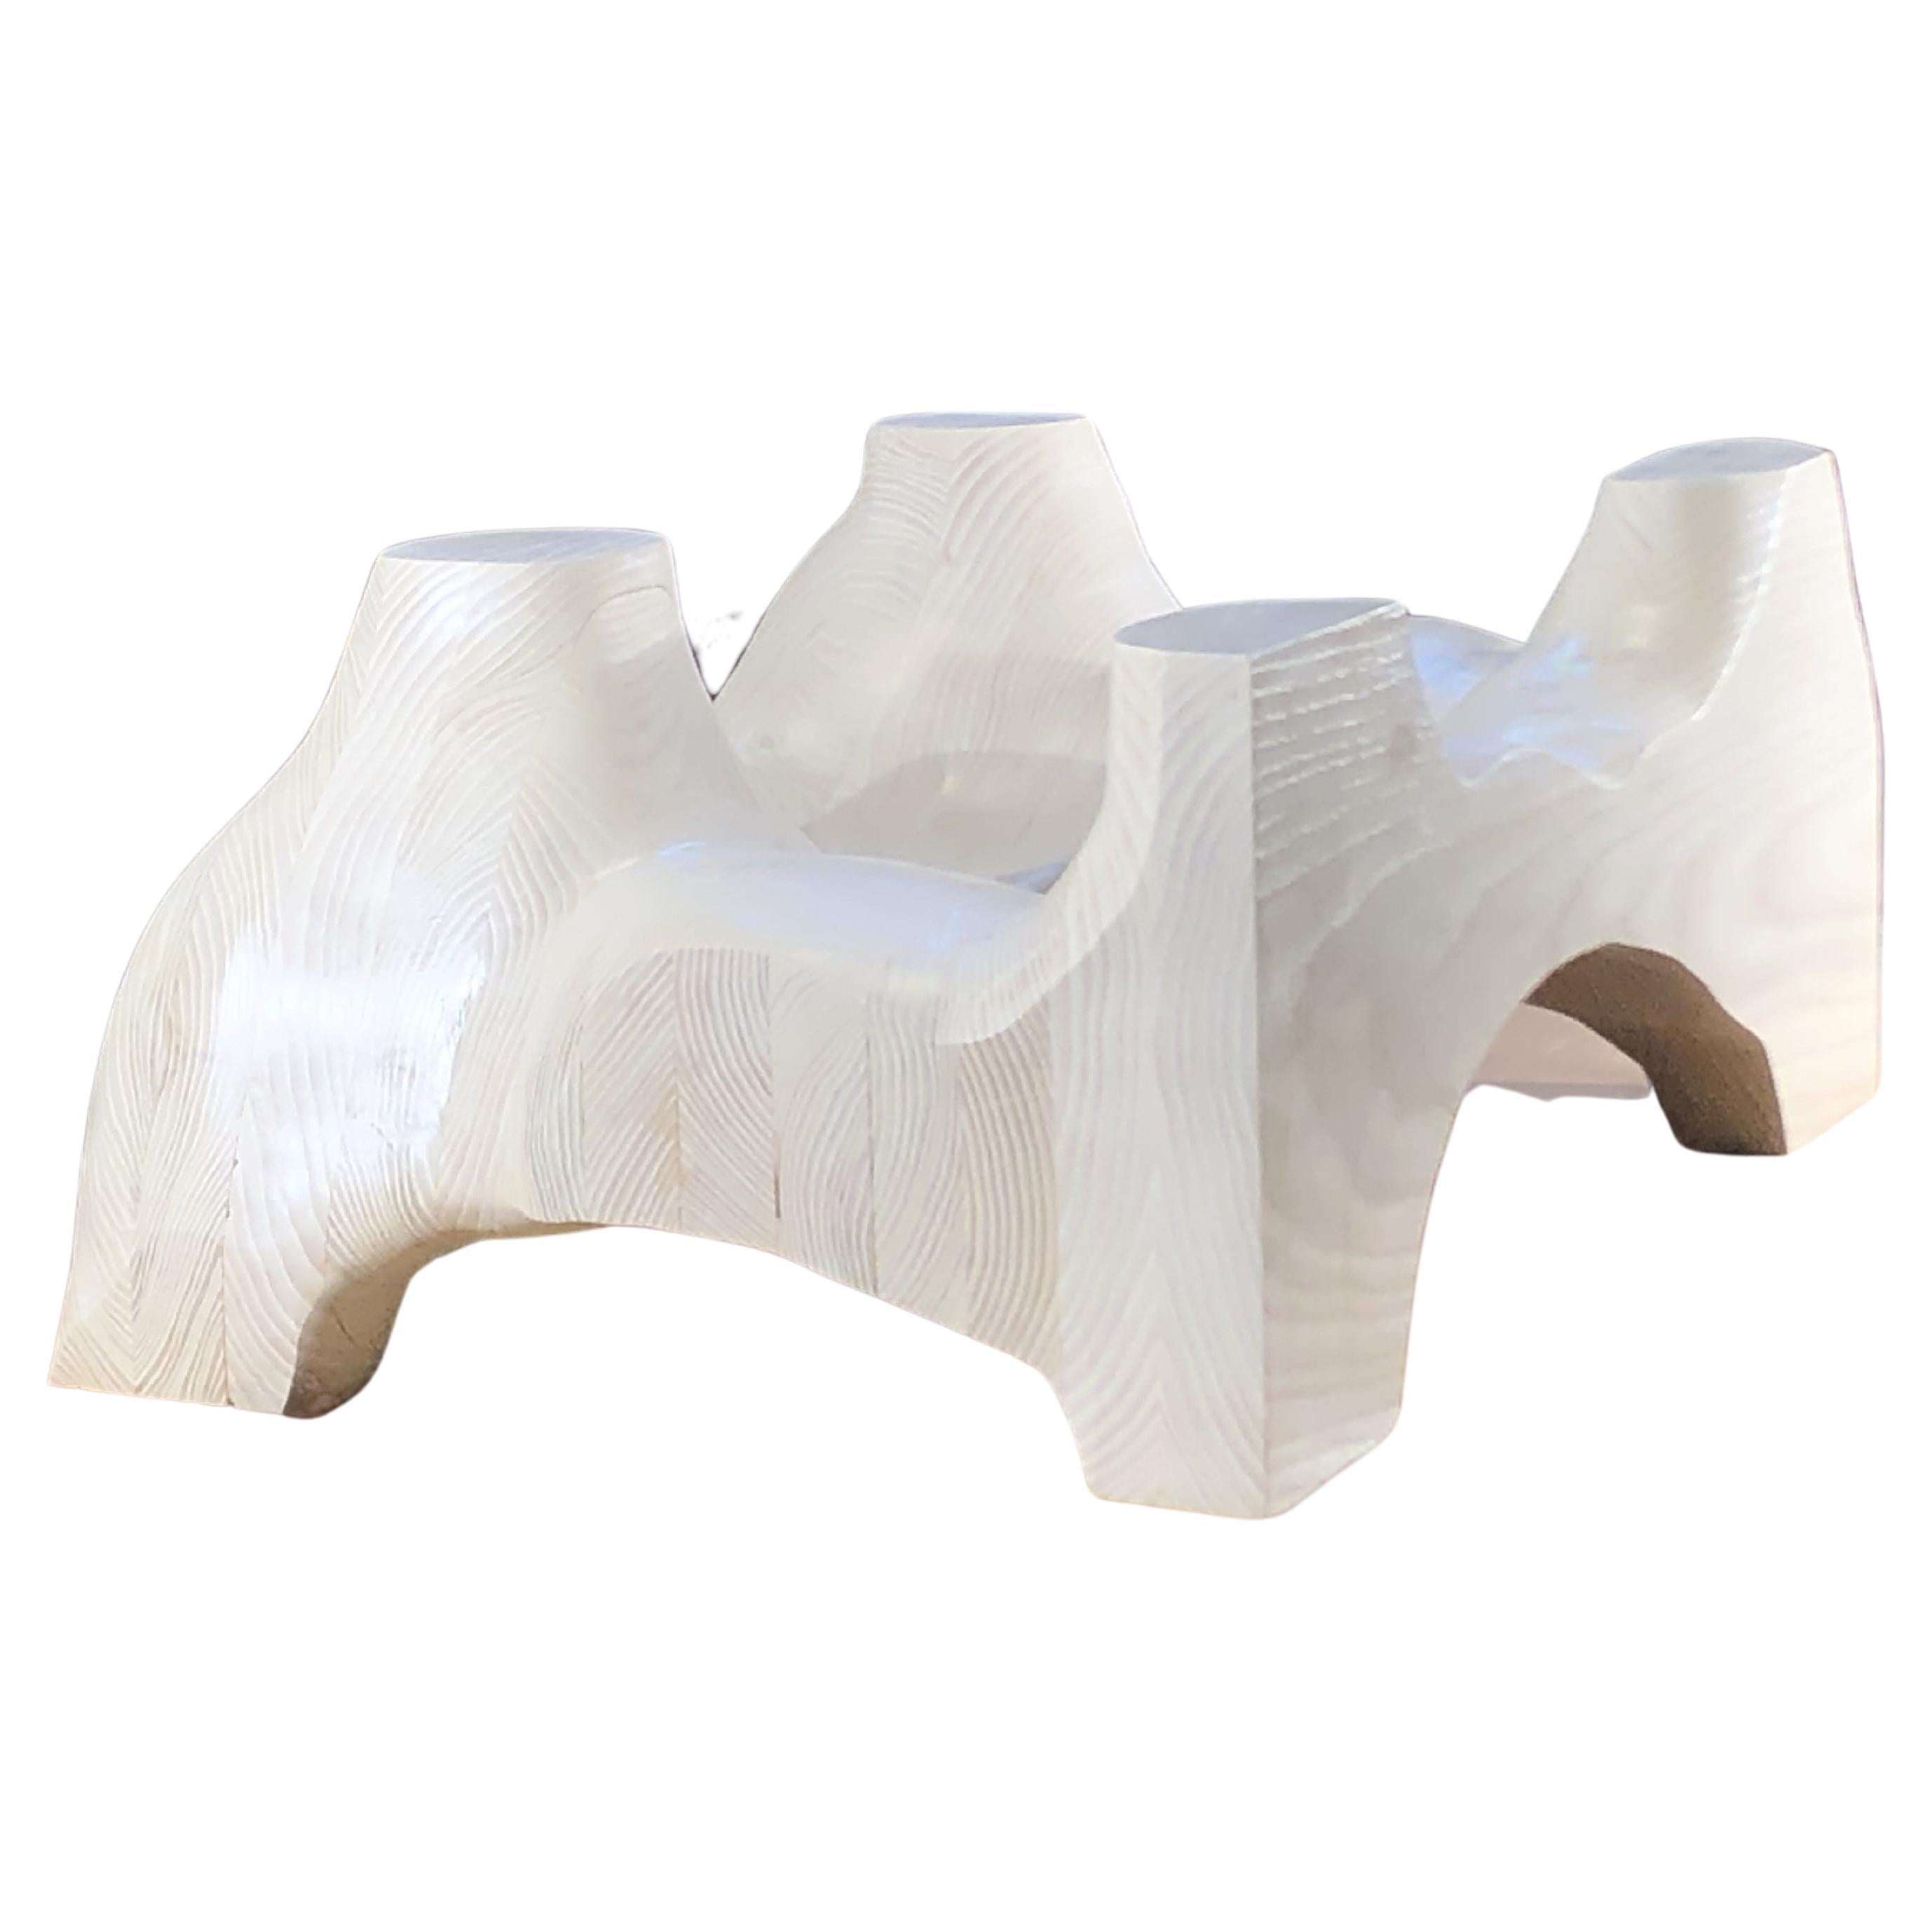 Hand-Carved Bleached White Ash Flow Coffee Table